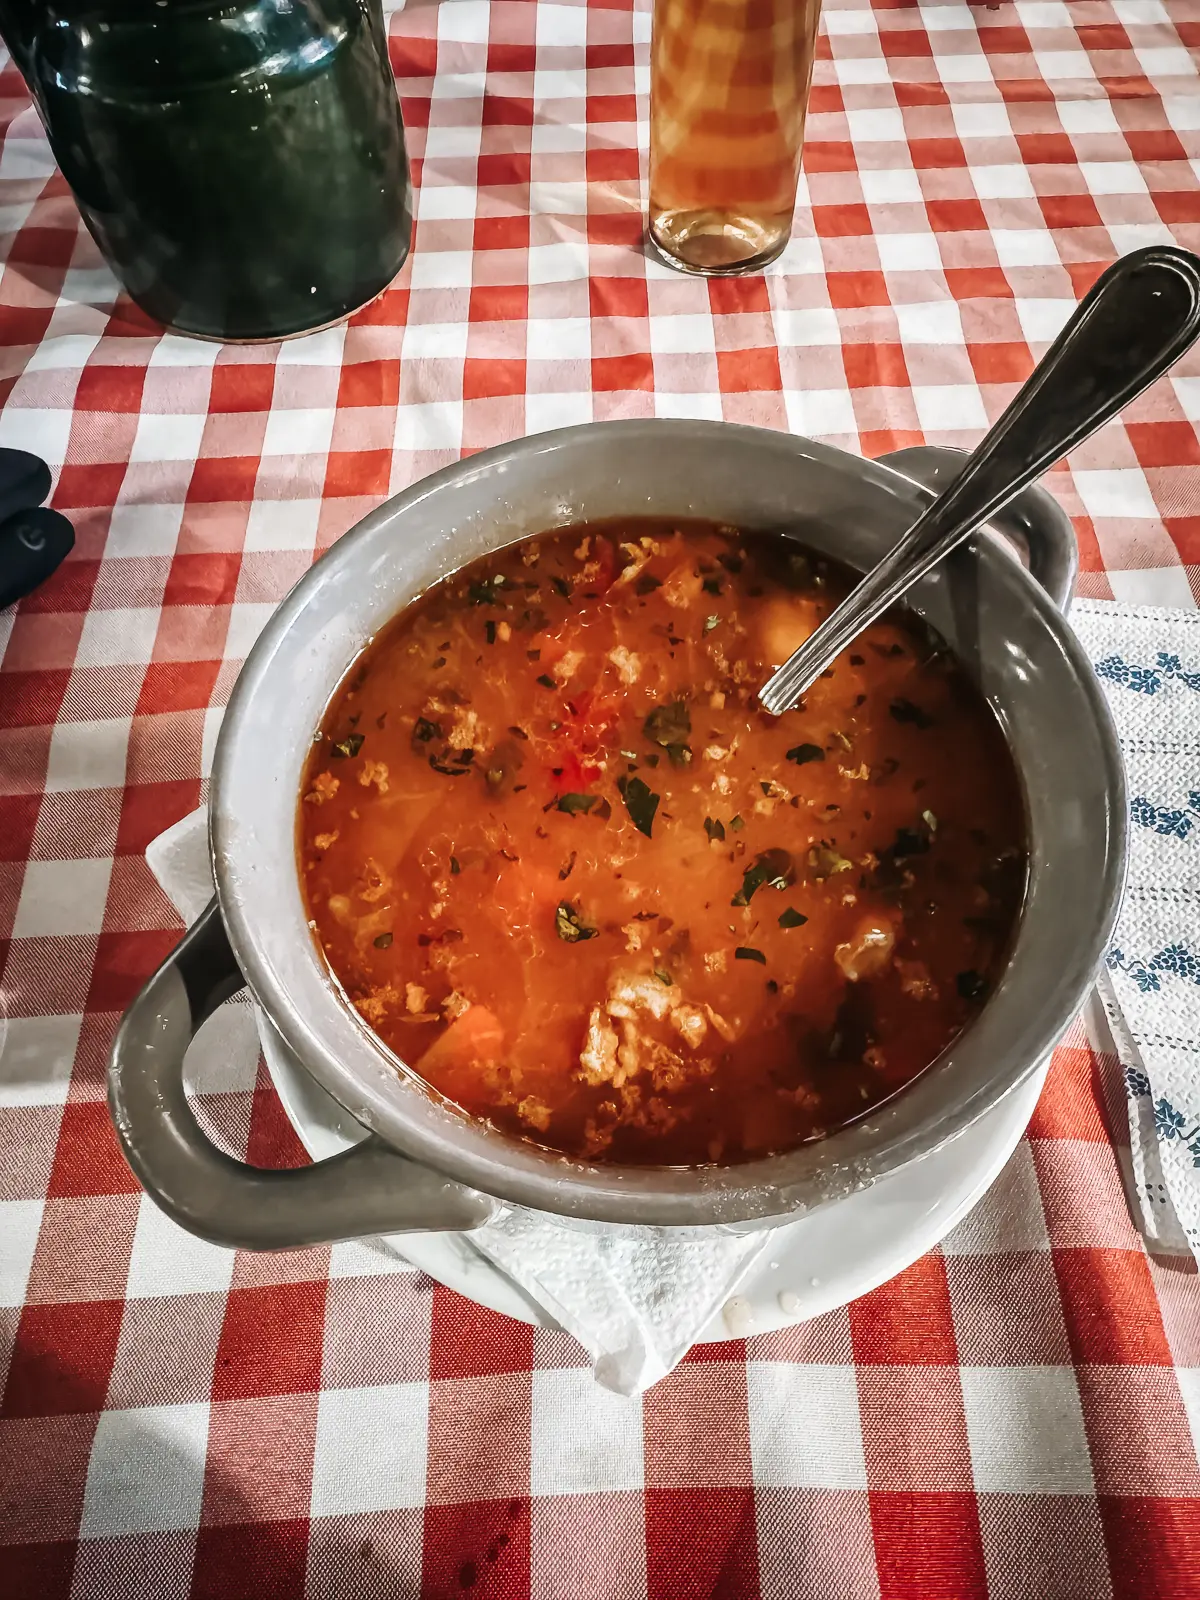 Orange Gulyas soup in a grey bowl on a table with a red and white checkered tablecloth, best street food in Budapest. 